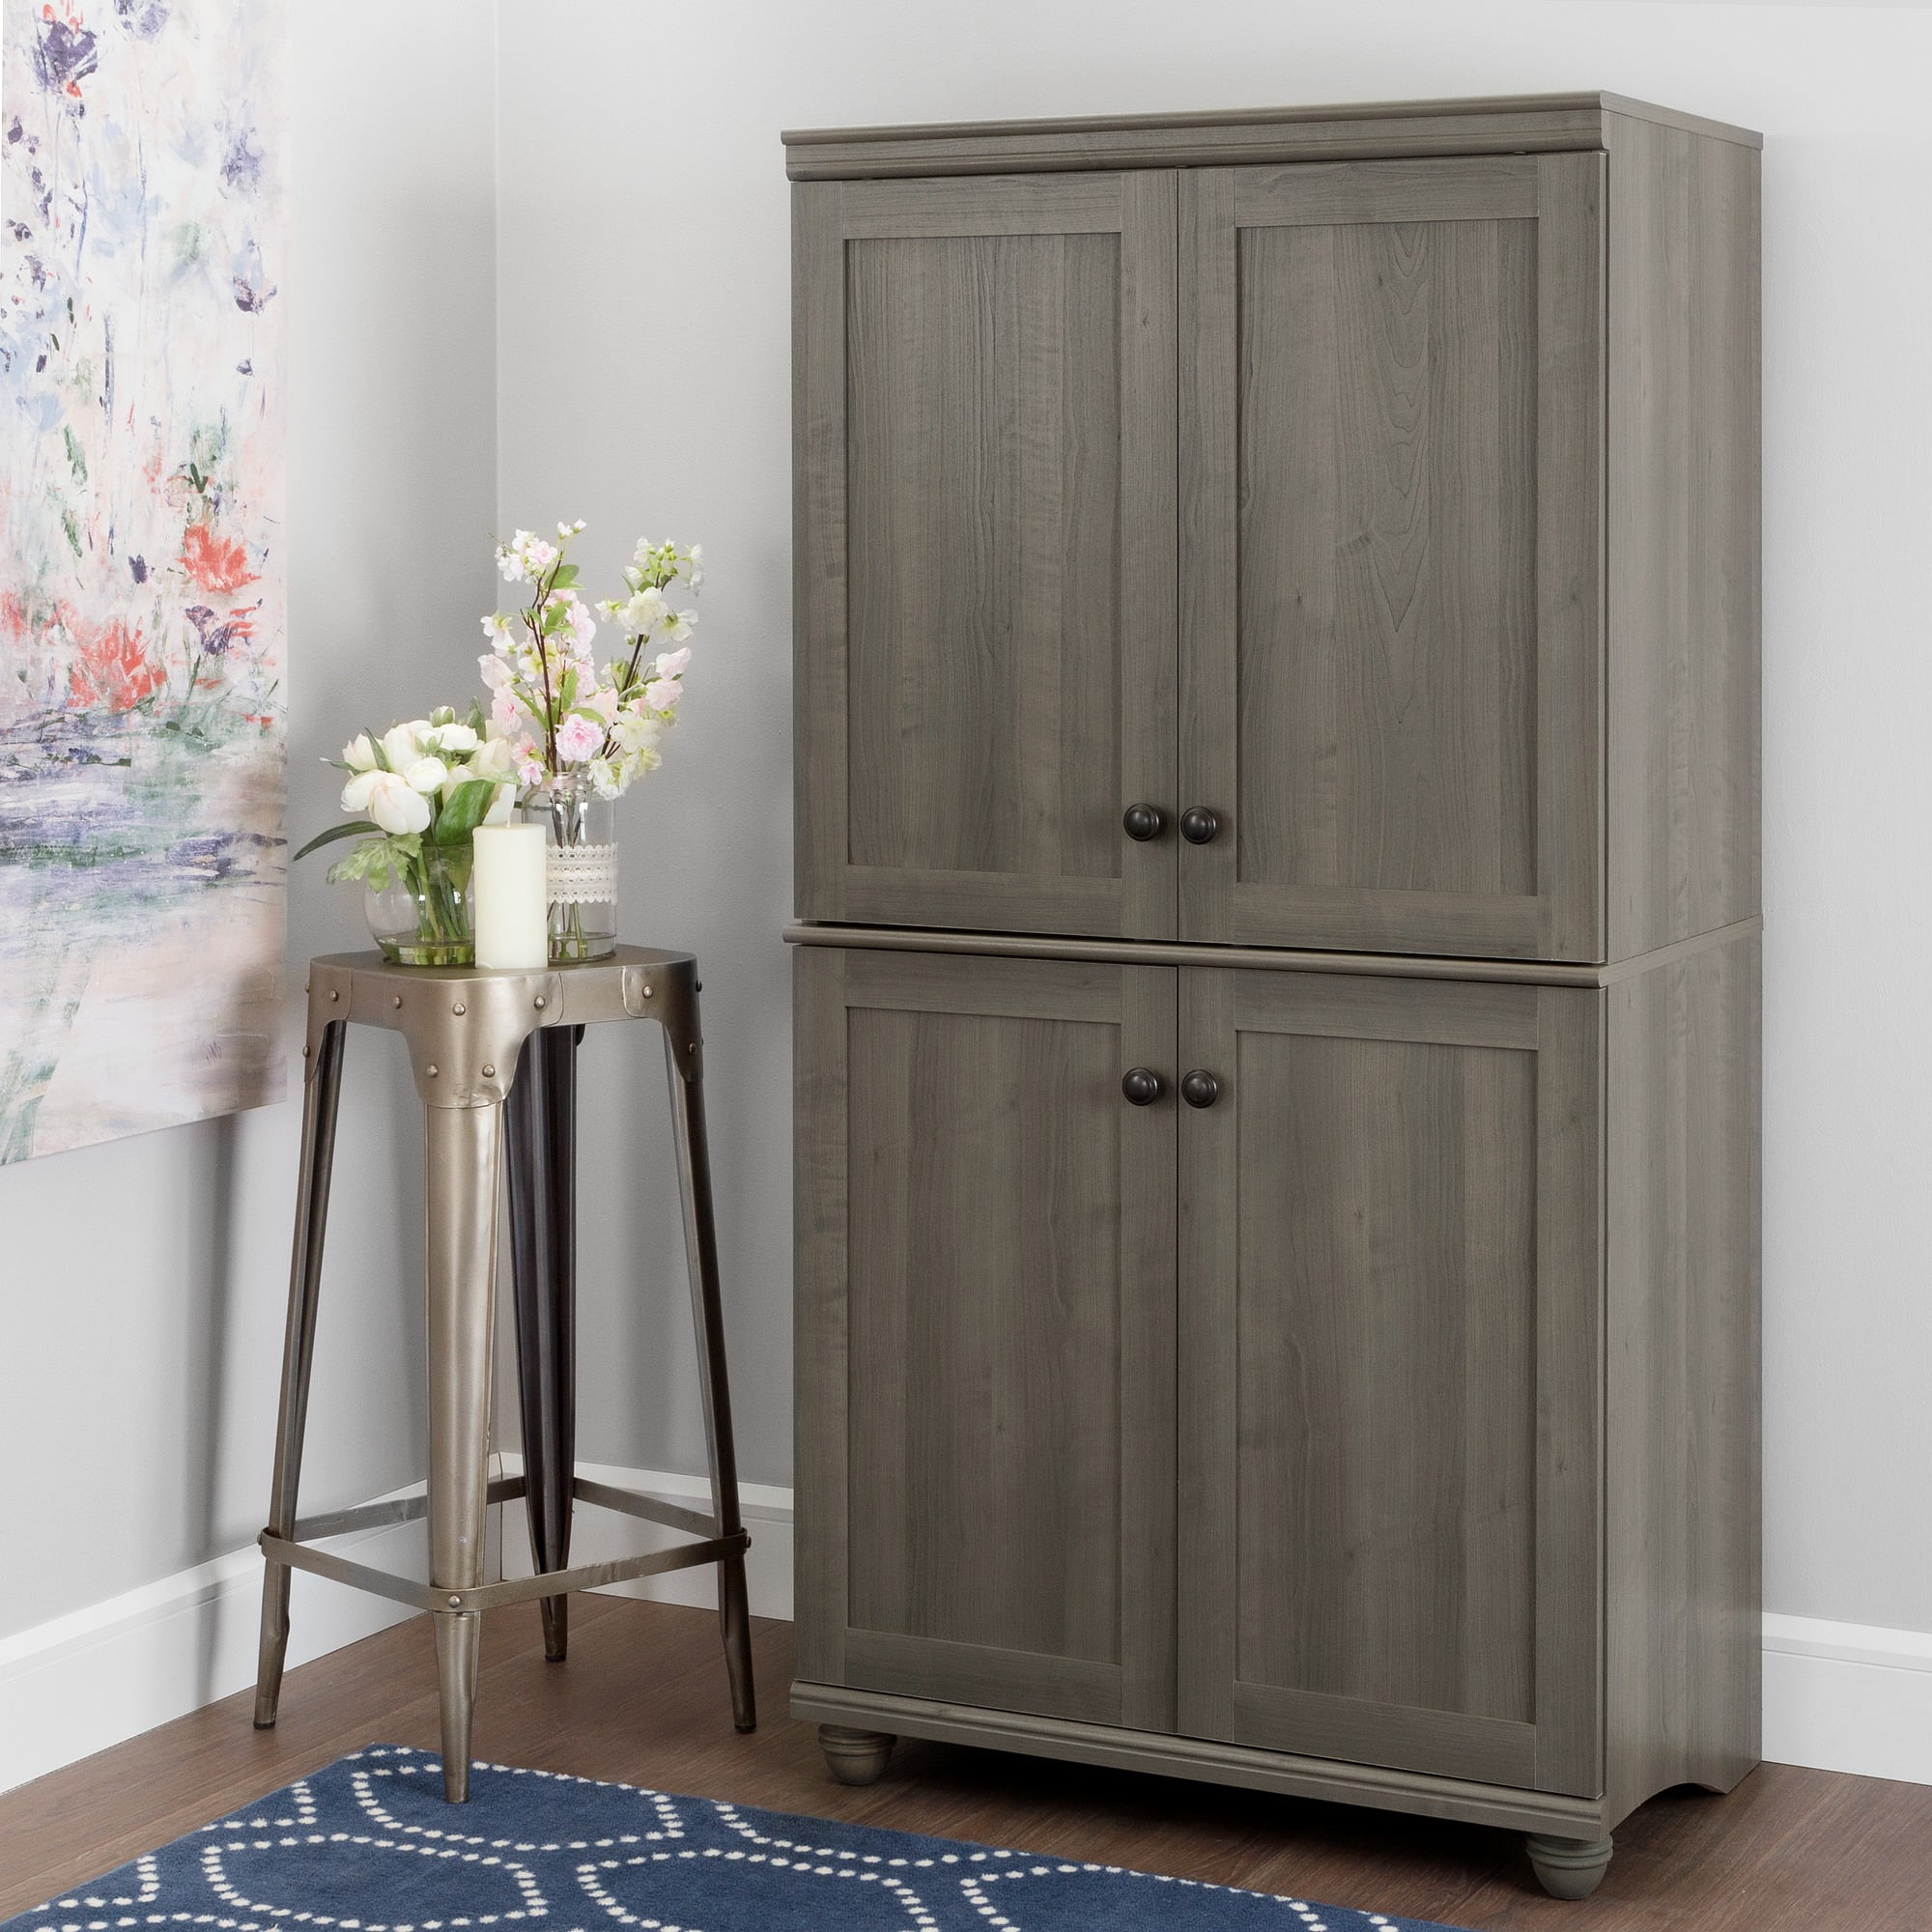 South Shore Hopedale 2 Door Storage Cabinet in Gray Maple 